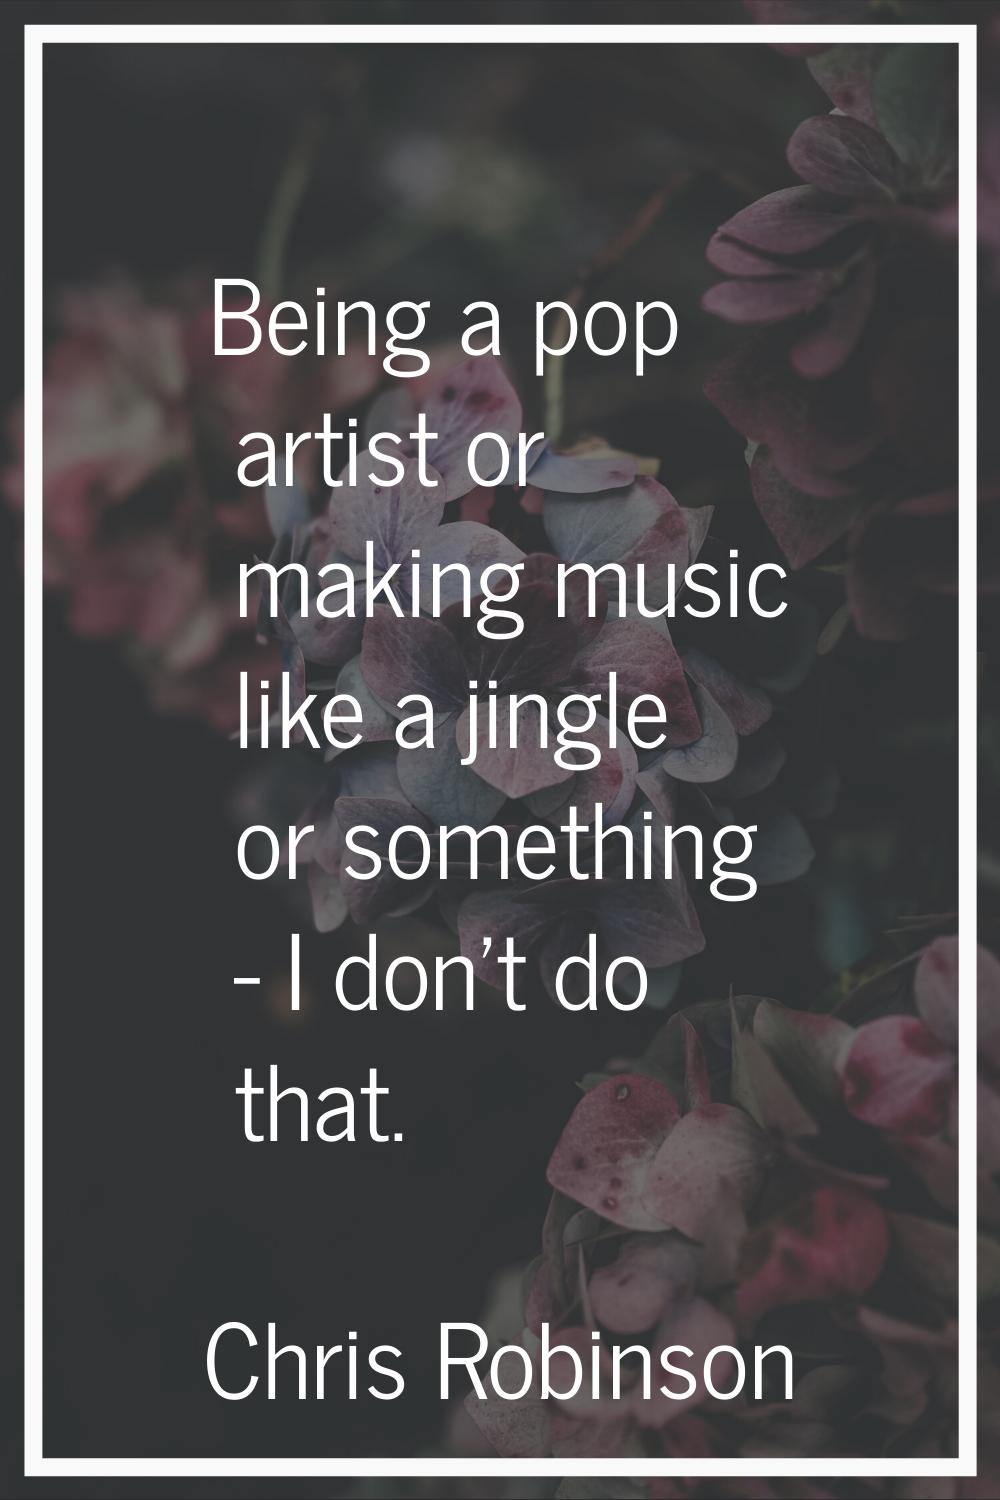 Being a pop artist or making music like a jingle or something - I don't do that.